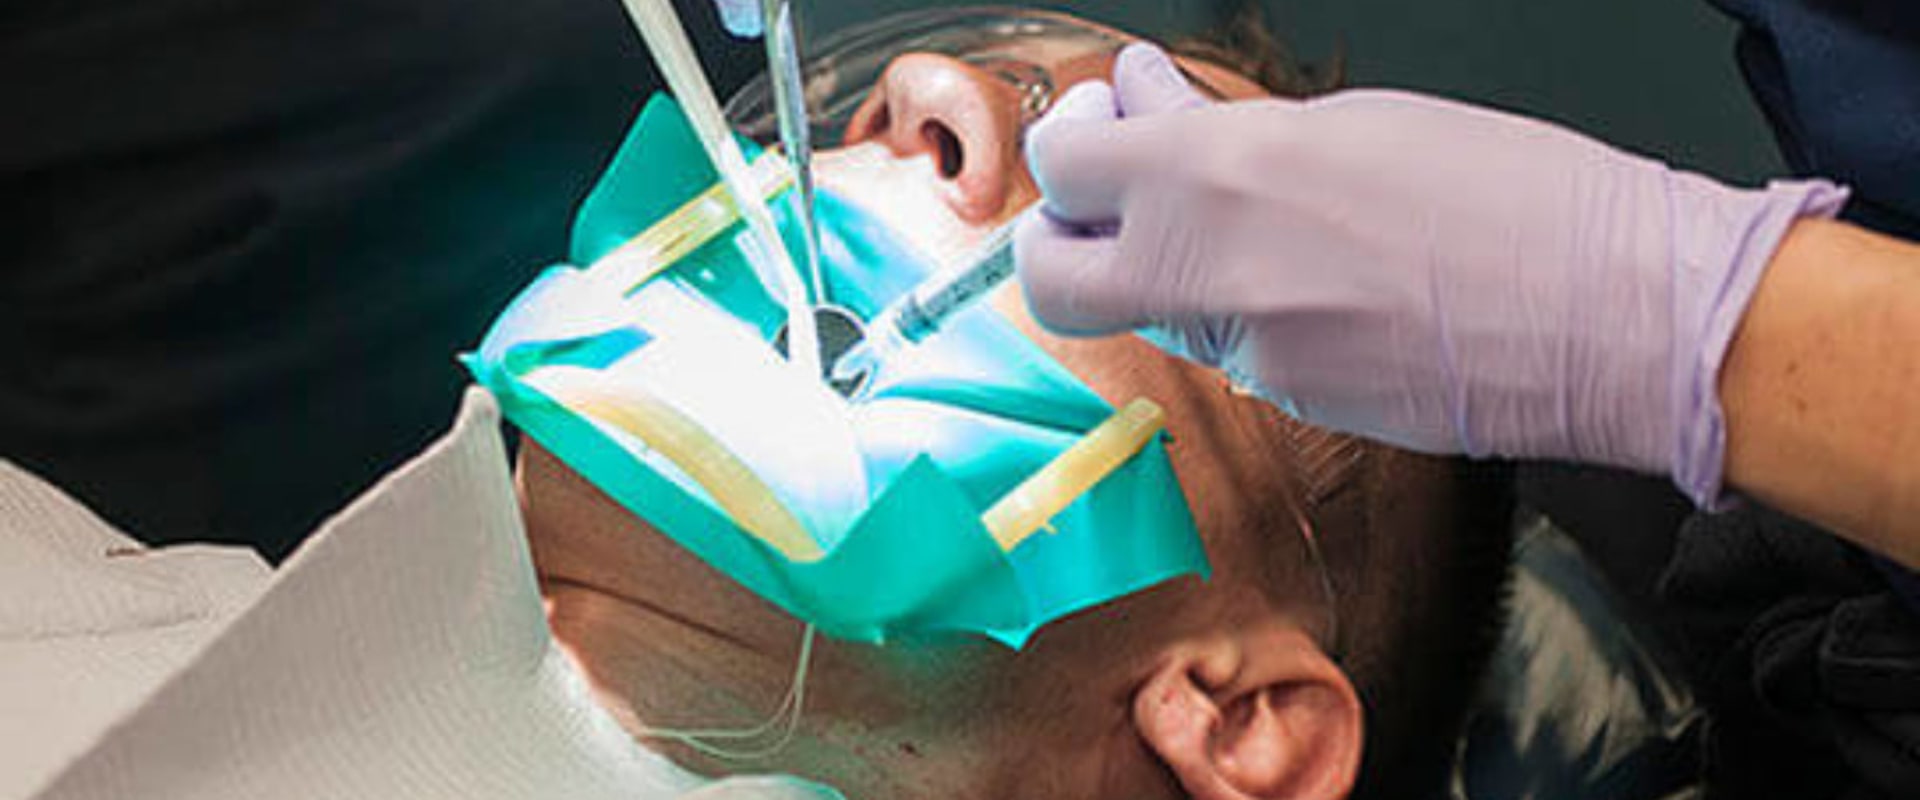 Why Should You See an Endodontist?